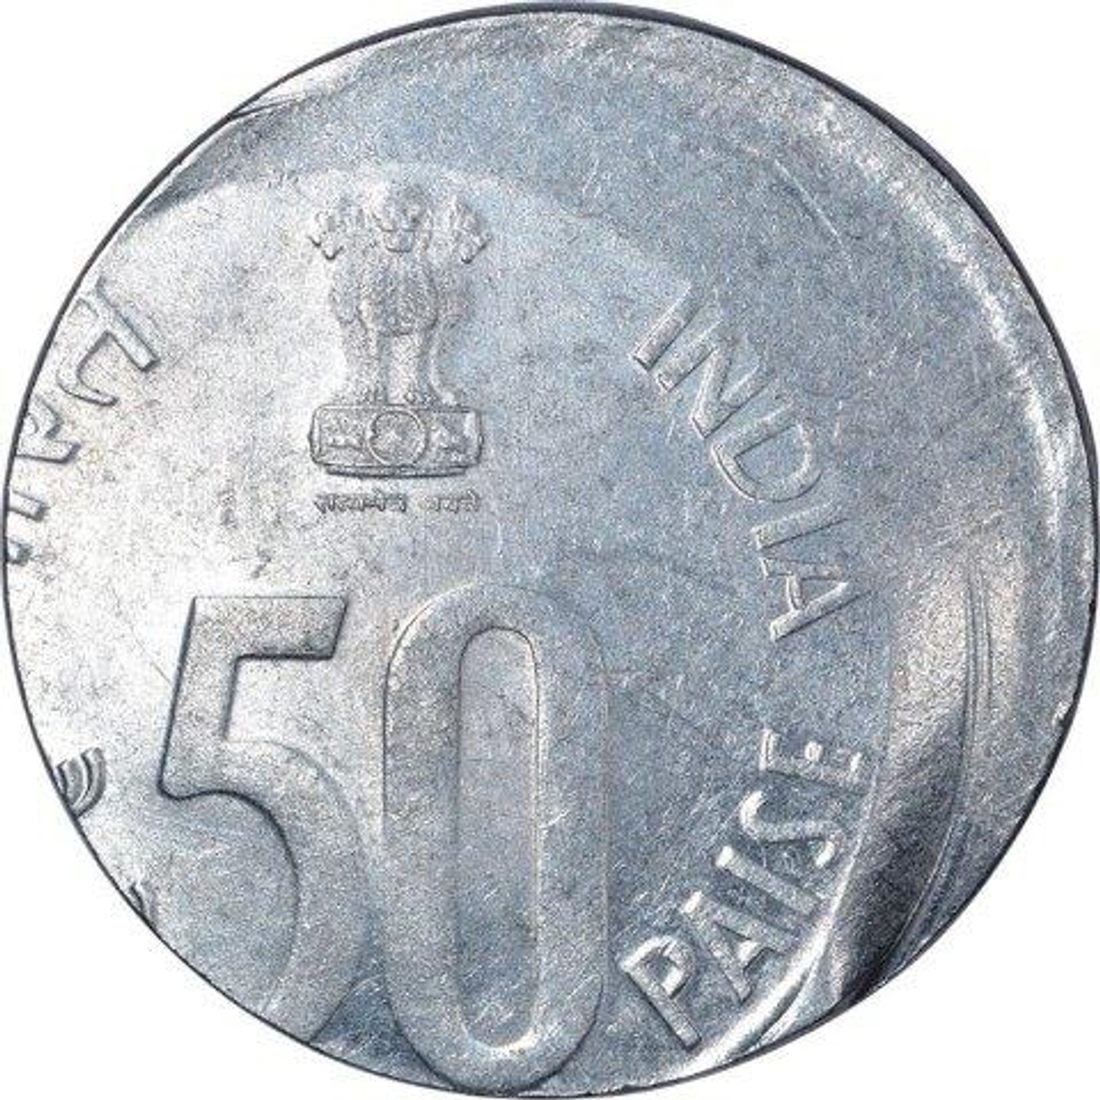 Steel Fifty Paisa Error Coin of 50th Year of Independence.